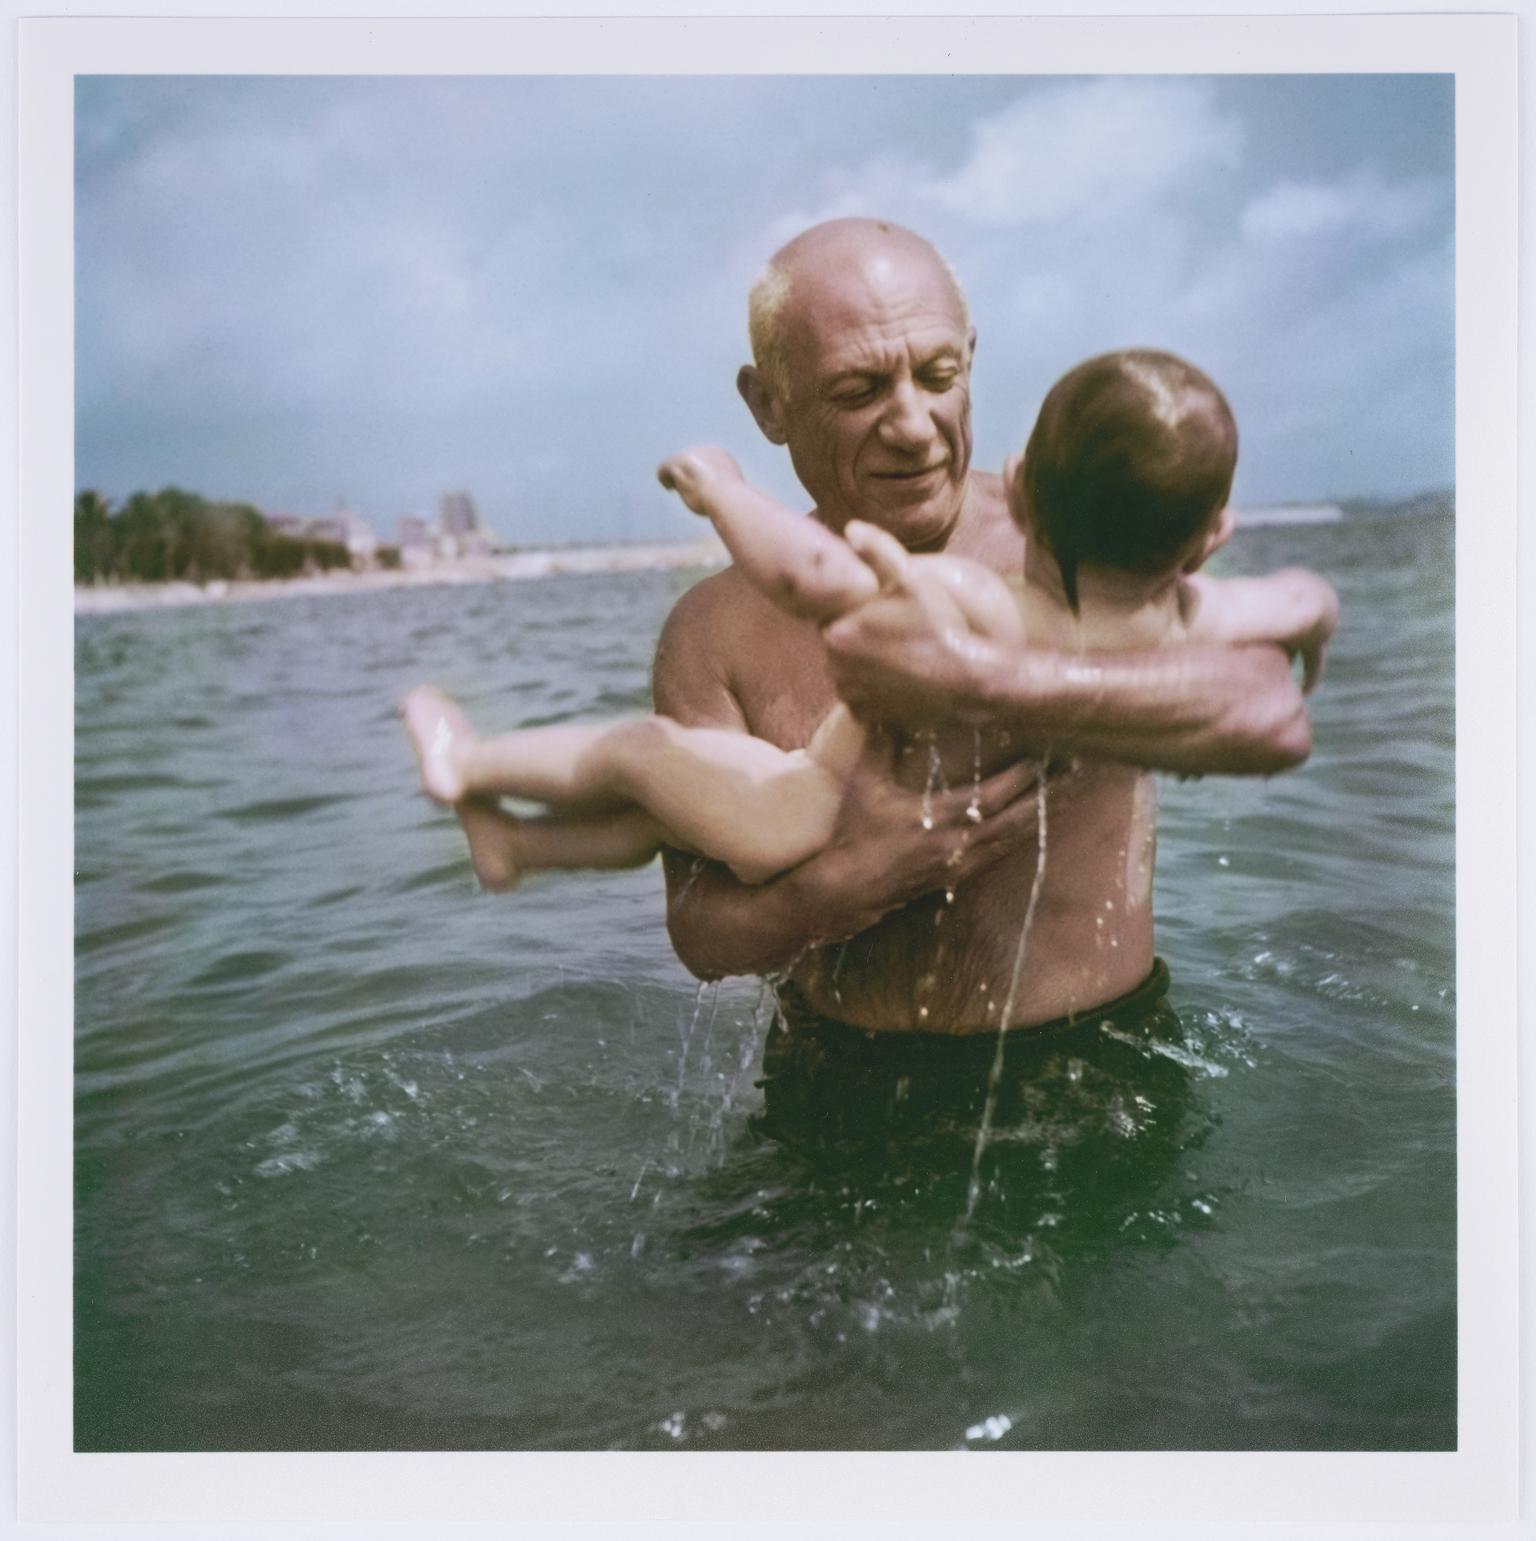 Pablo Picasso playing in the water with his son Claude, Vallauris, France